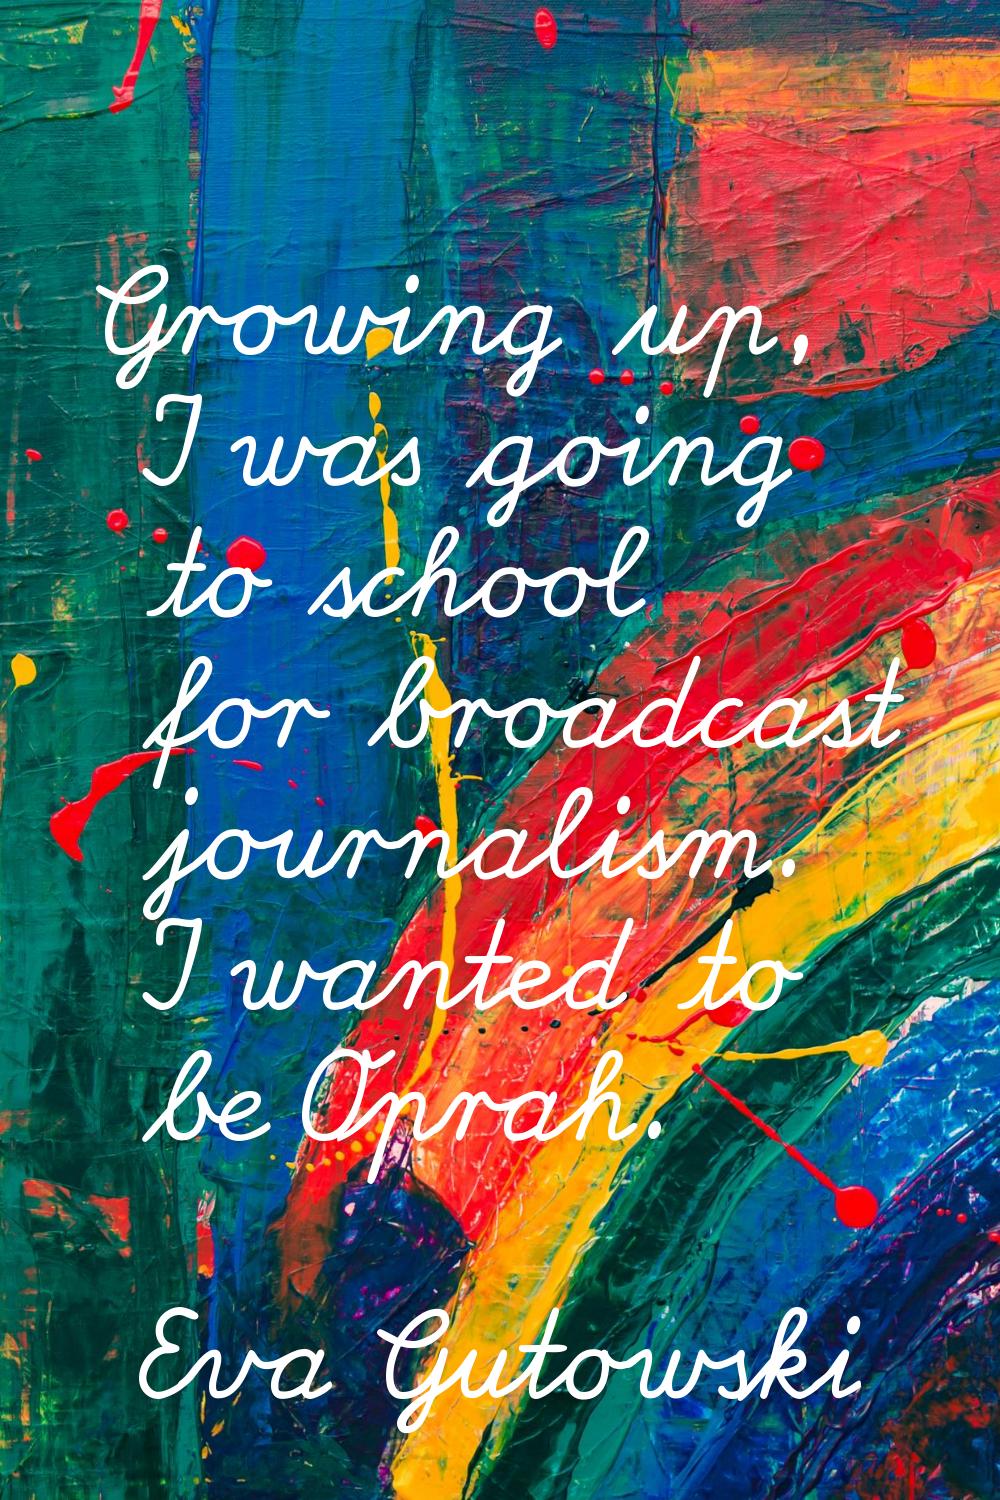 Growing up, I was going to school for broadcast journalism. I wanted to be Oprah.